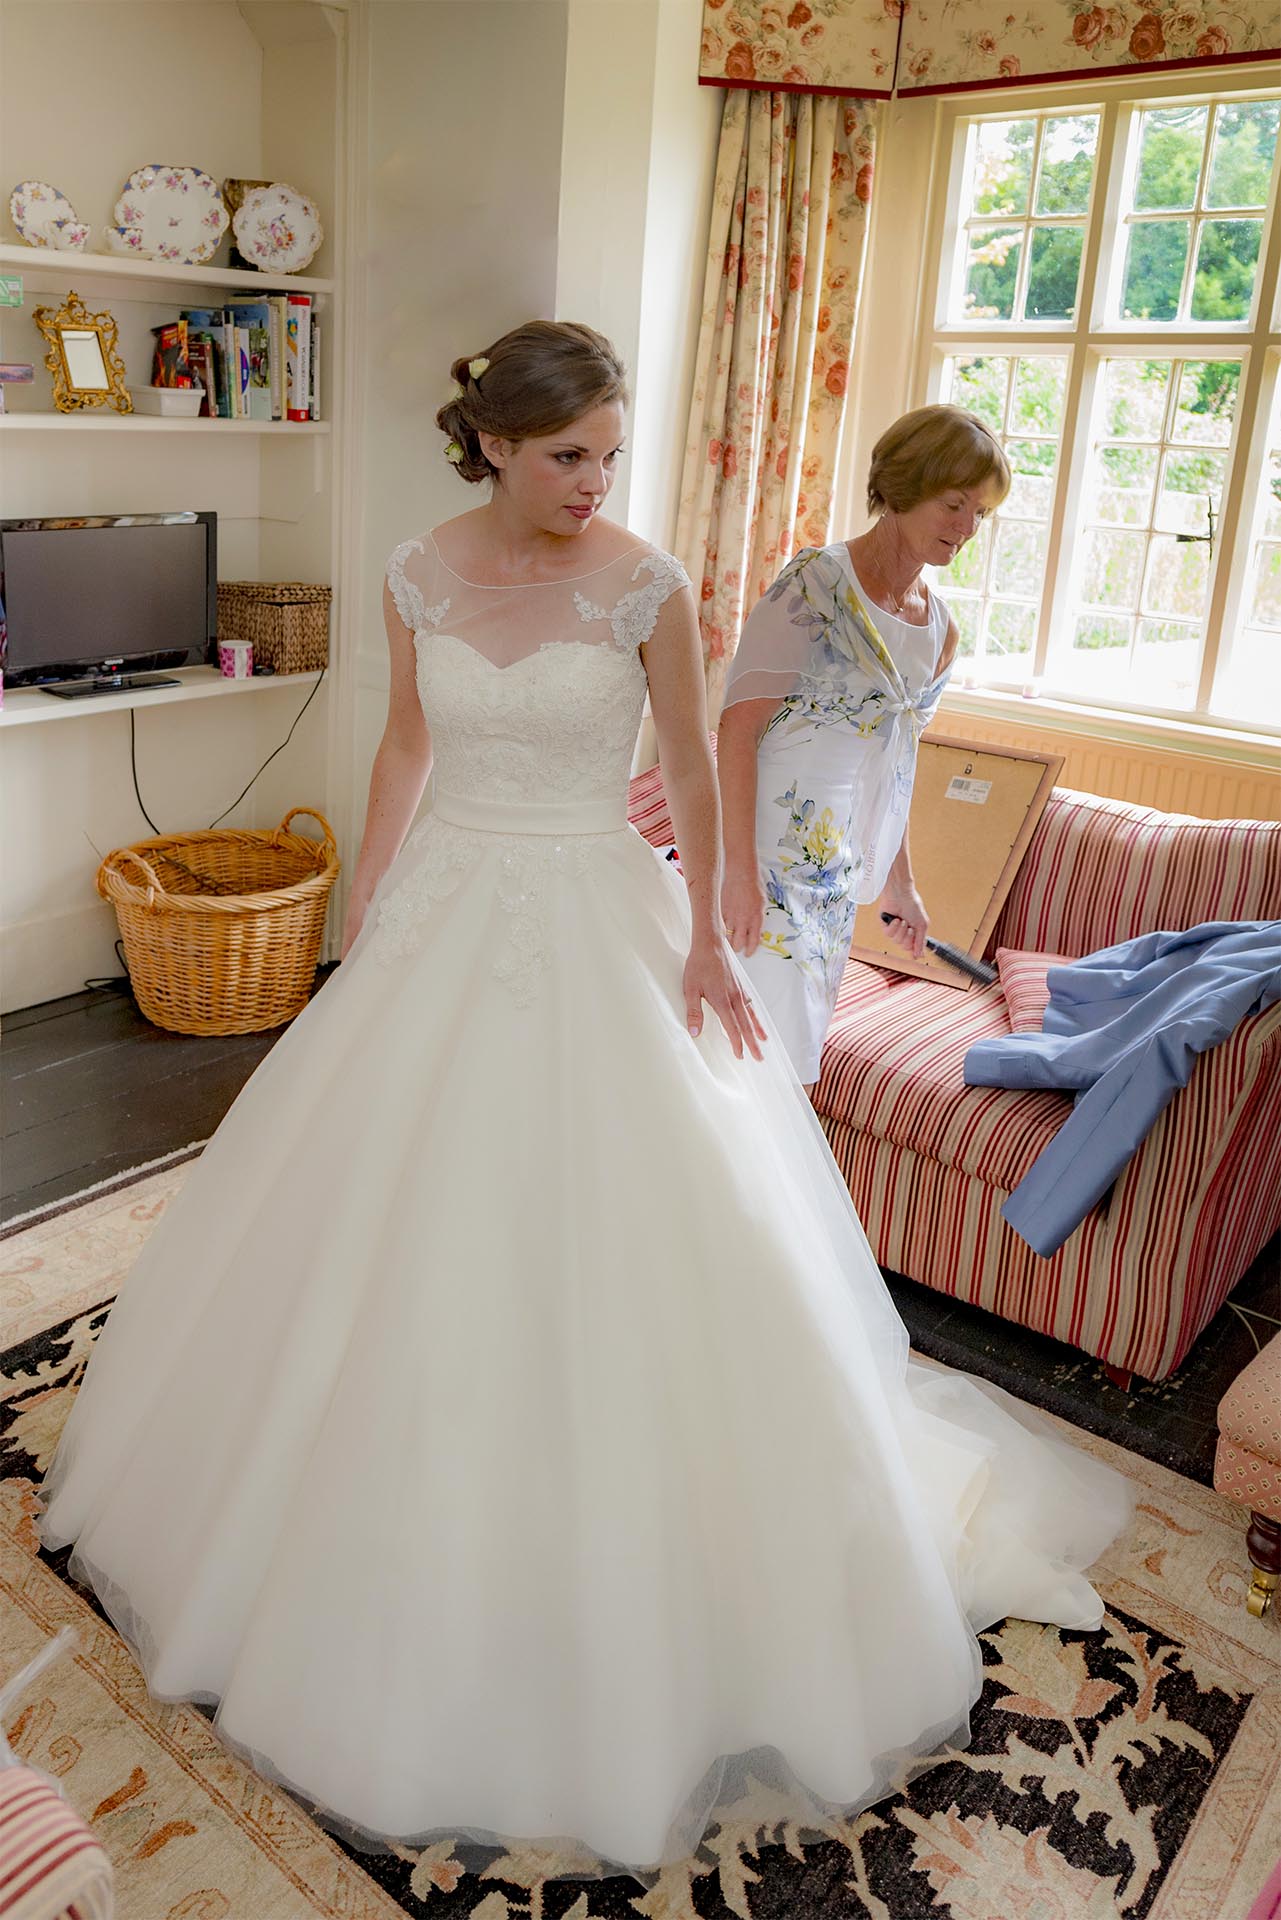 Ashtead polesden lacey surrey wedding article on extreme wide angle lenses